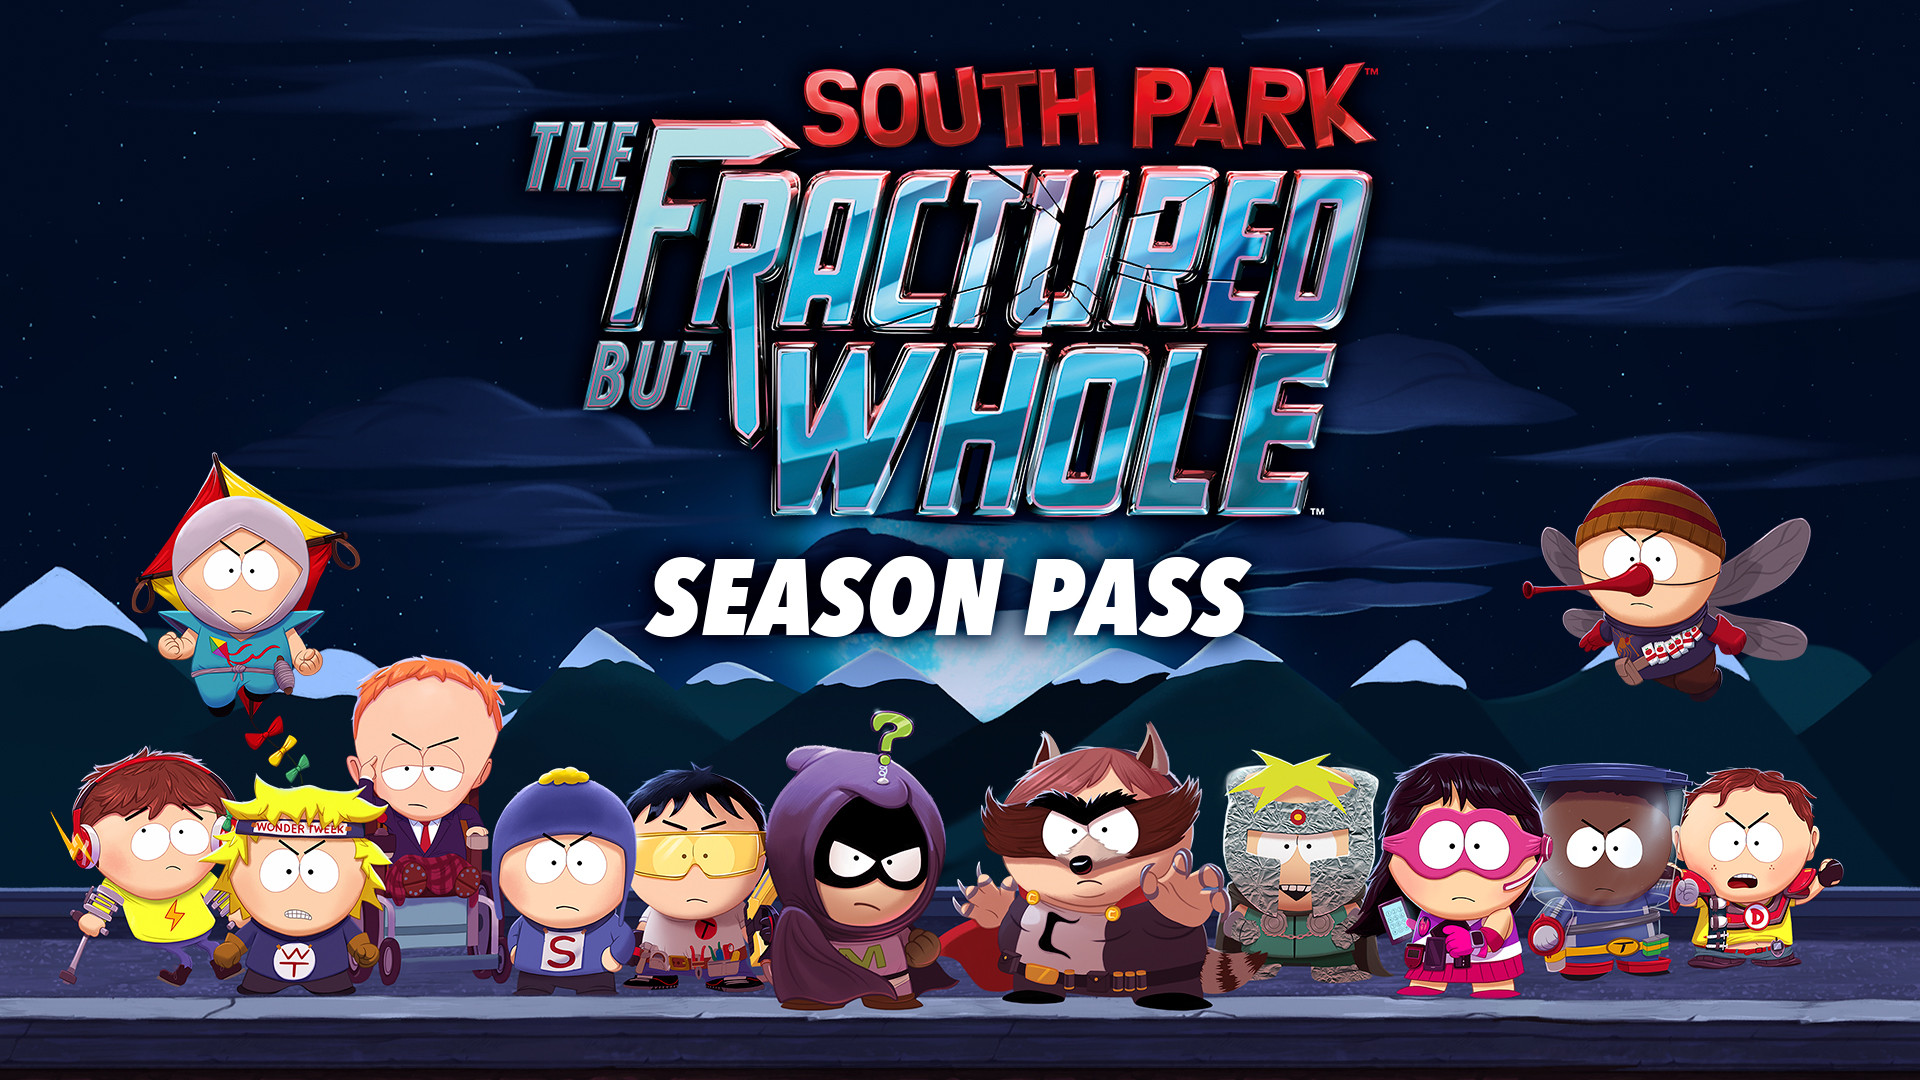 South Park: The Fractured But Whole - Season Pass EU XBOX One CD Key